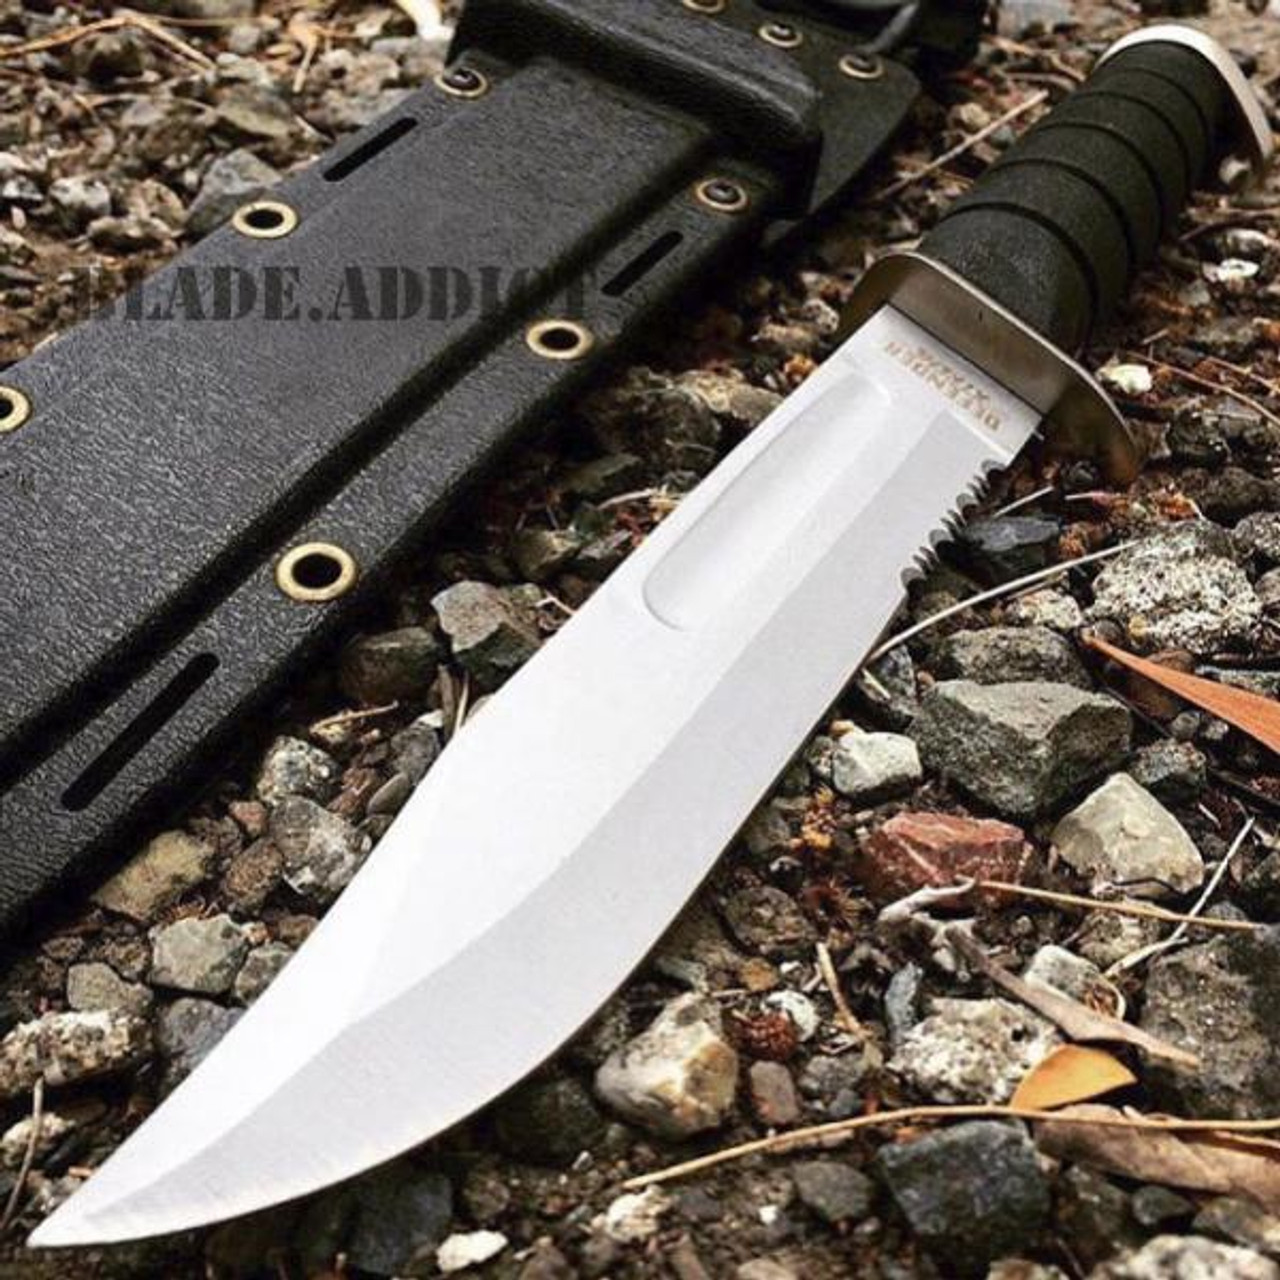 12" Marine Tactical Military Combat Survival Knife Fixed Blade Camping - MEGAKNIFE